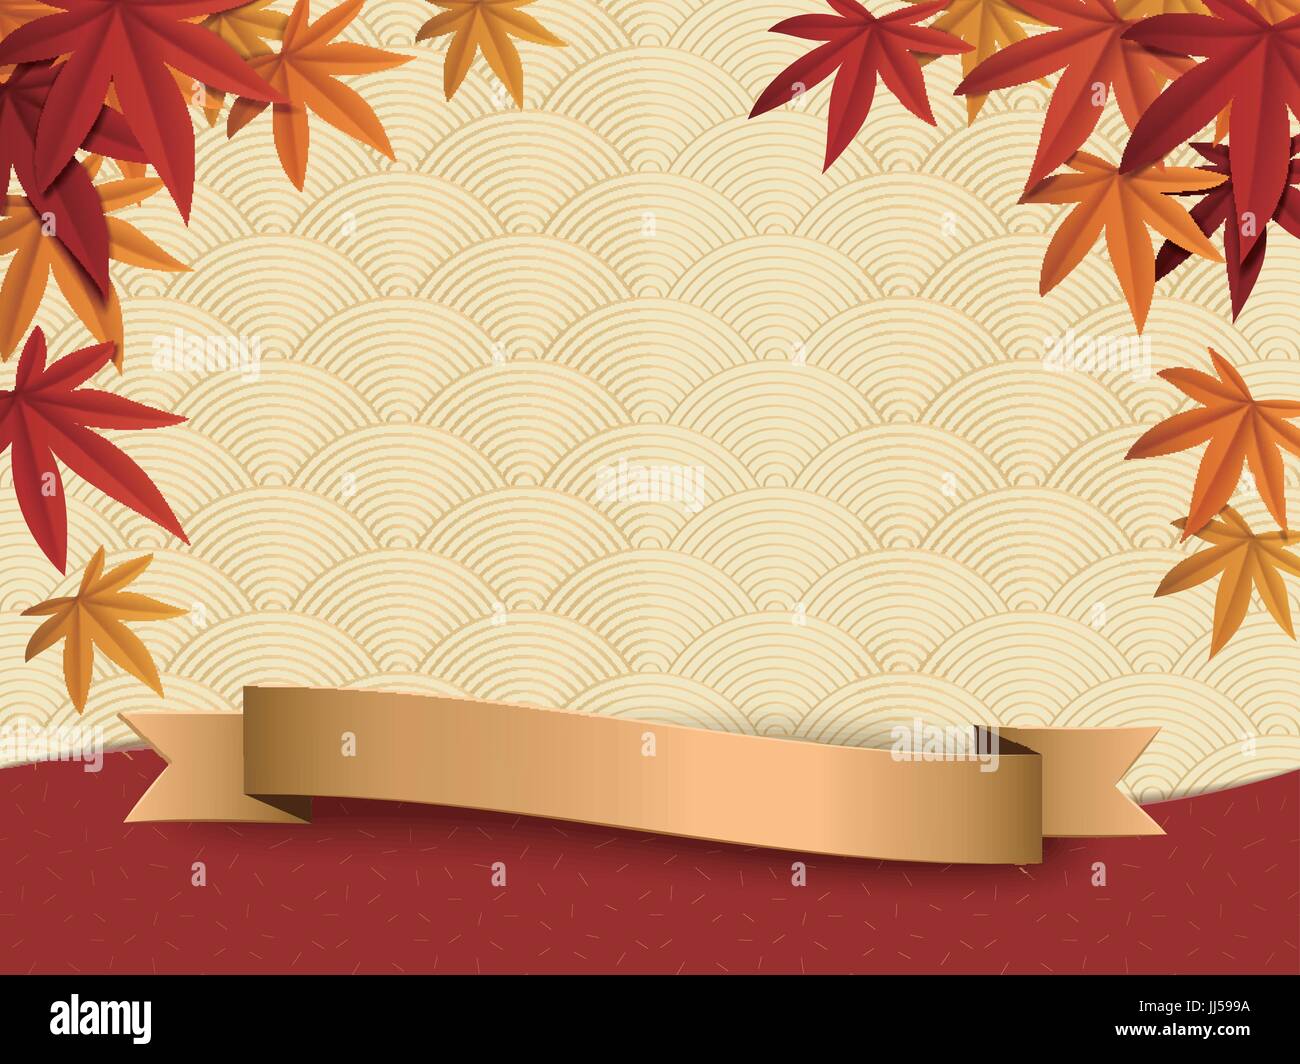 Fall season background design, maples frame isolated on japanese wave pattern background with golden labels in 3d illustration Stock Vector